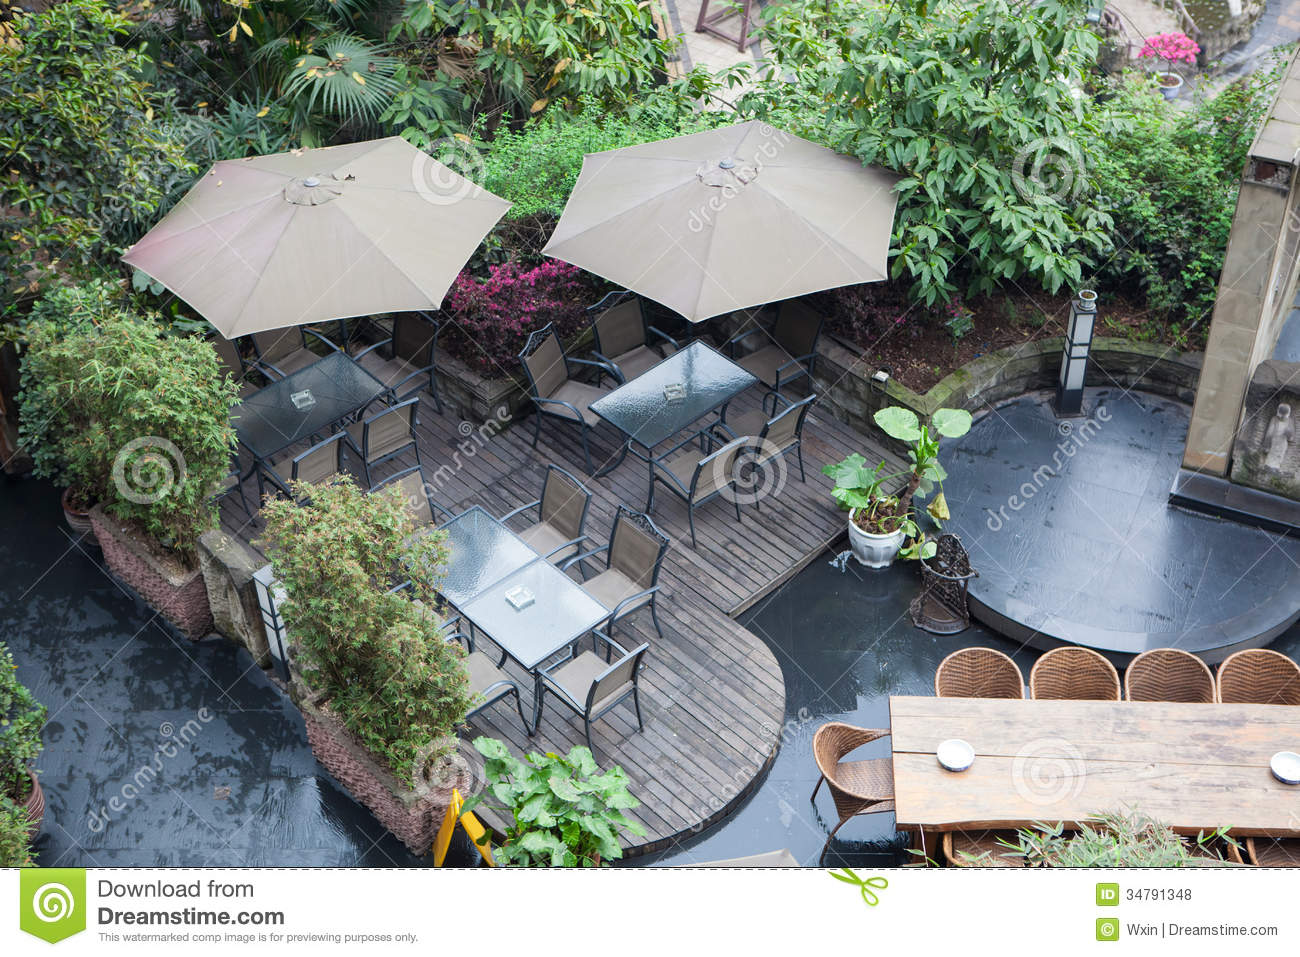 House Patio With Table And Chairs Under Umbrella There Are A Lot Of